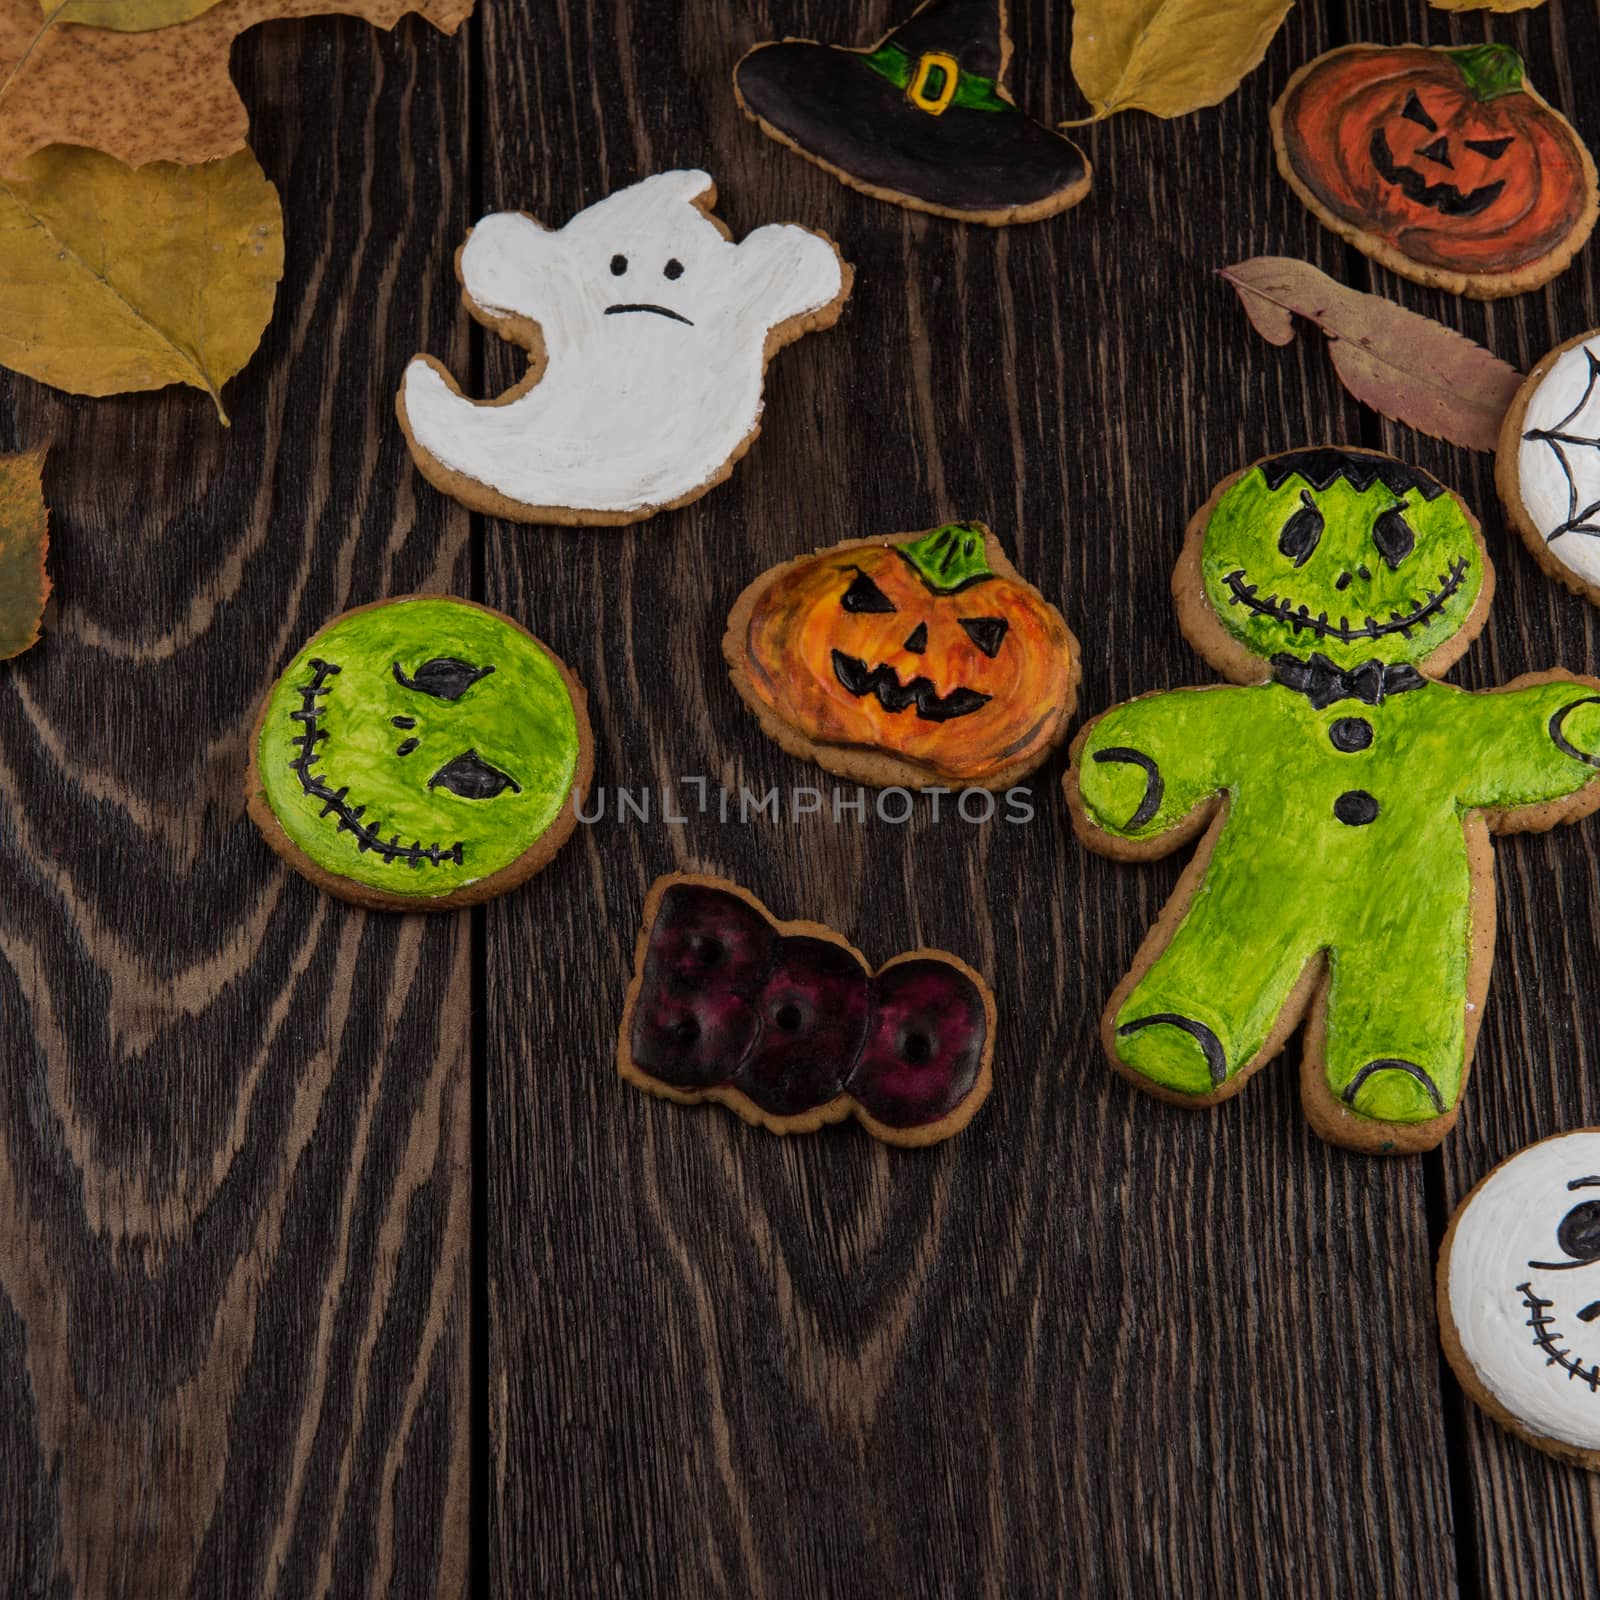 Homemade delicious ginger biscuits for Halloween by rusak